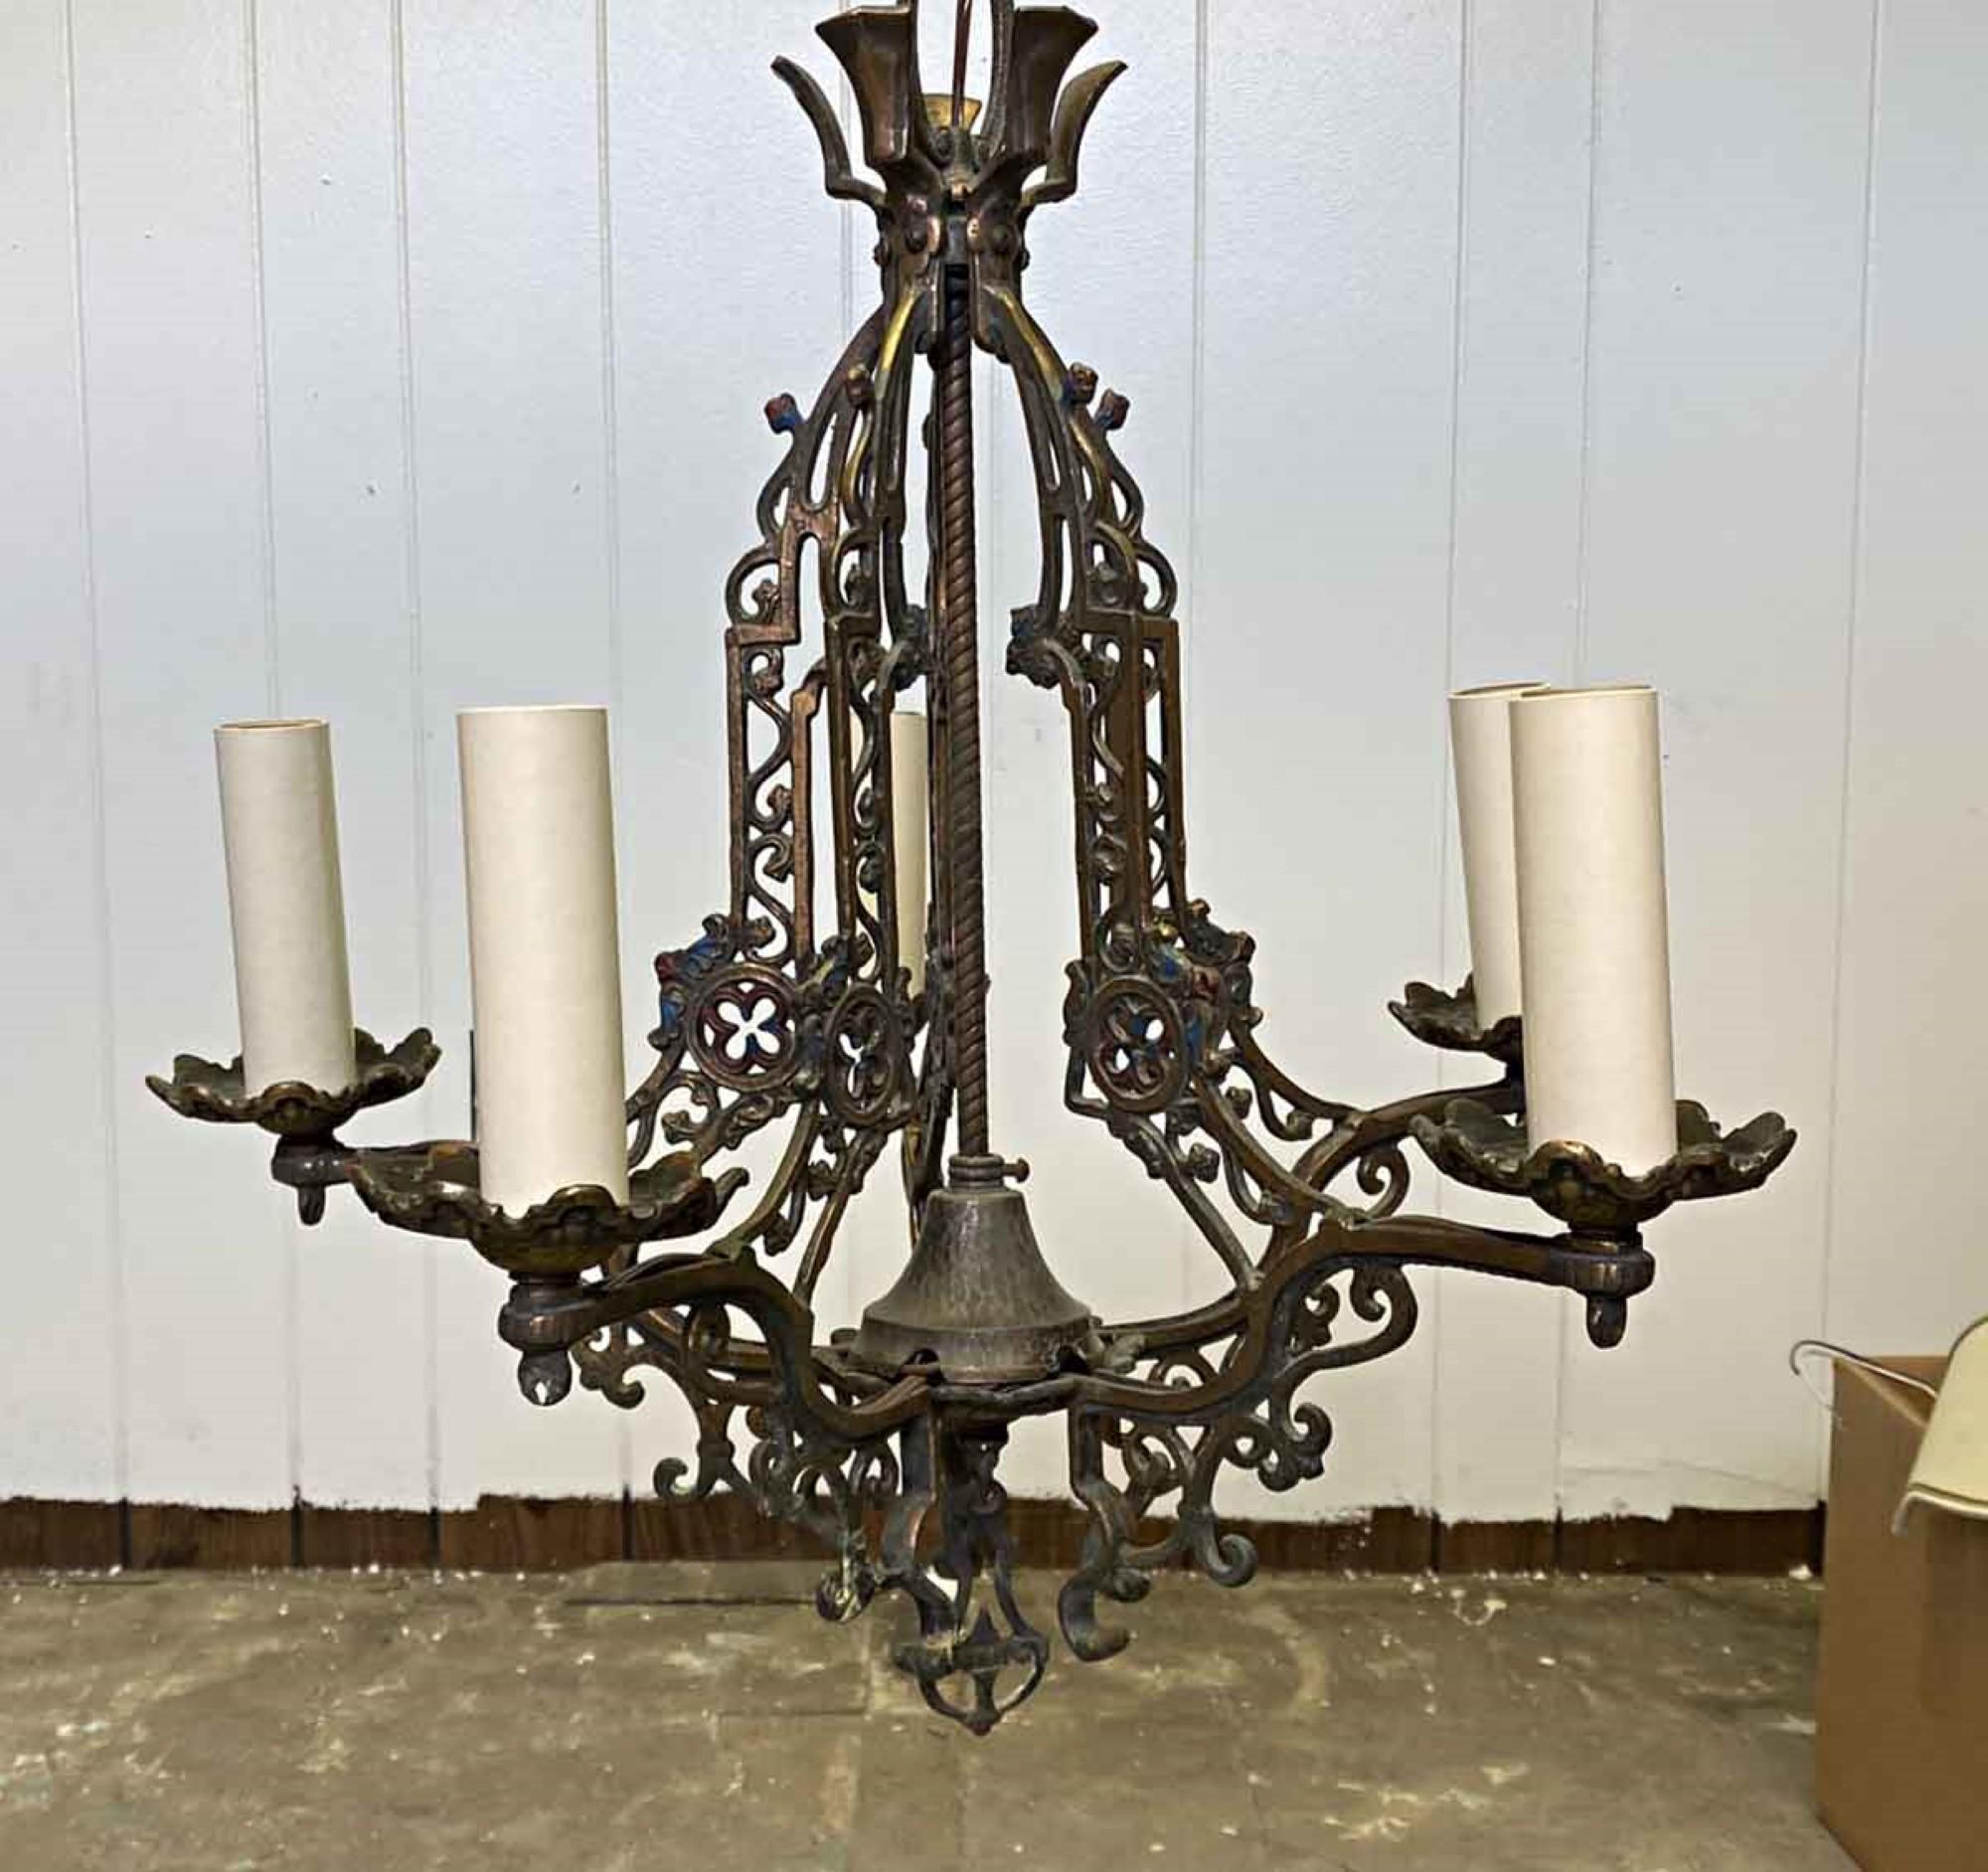 American 1910s Arts & Crafts Heavy Cast Bronze Chandelier with 5 Arms and Original Patina